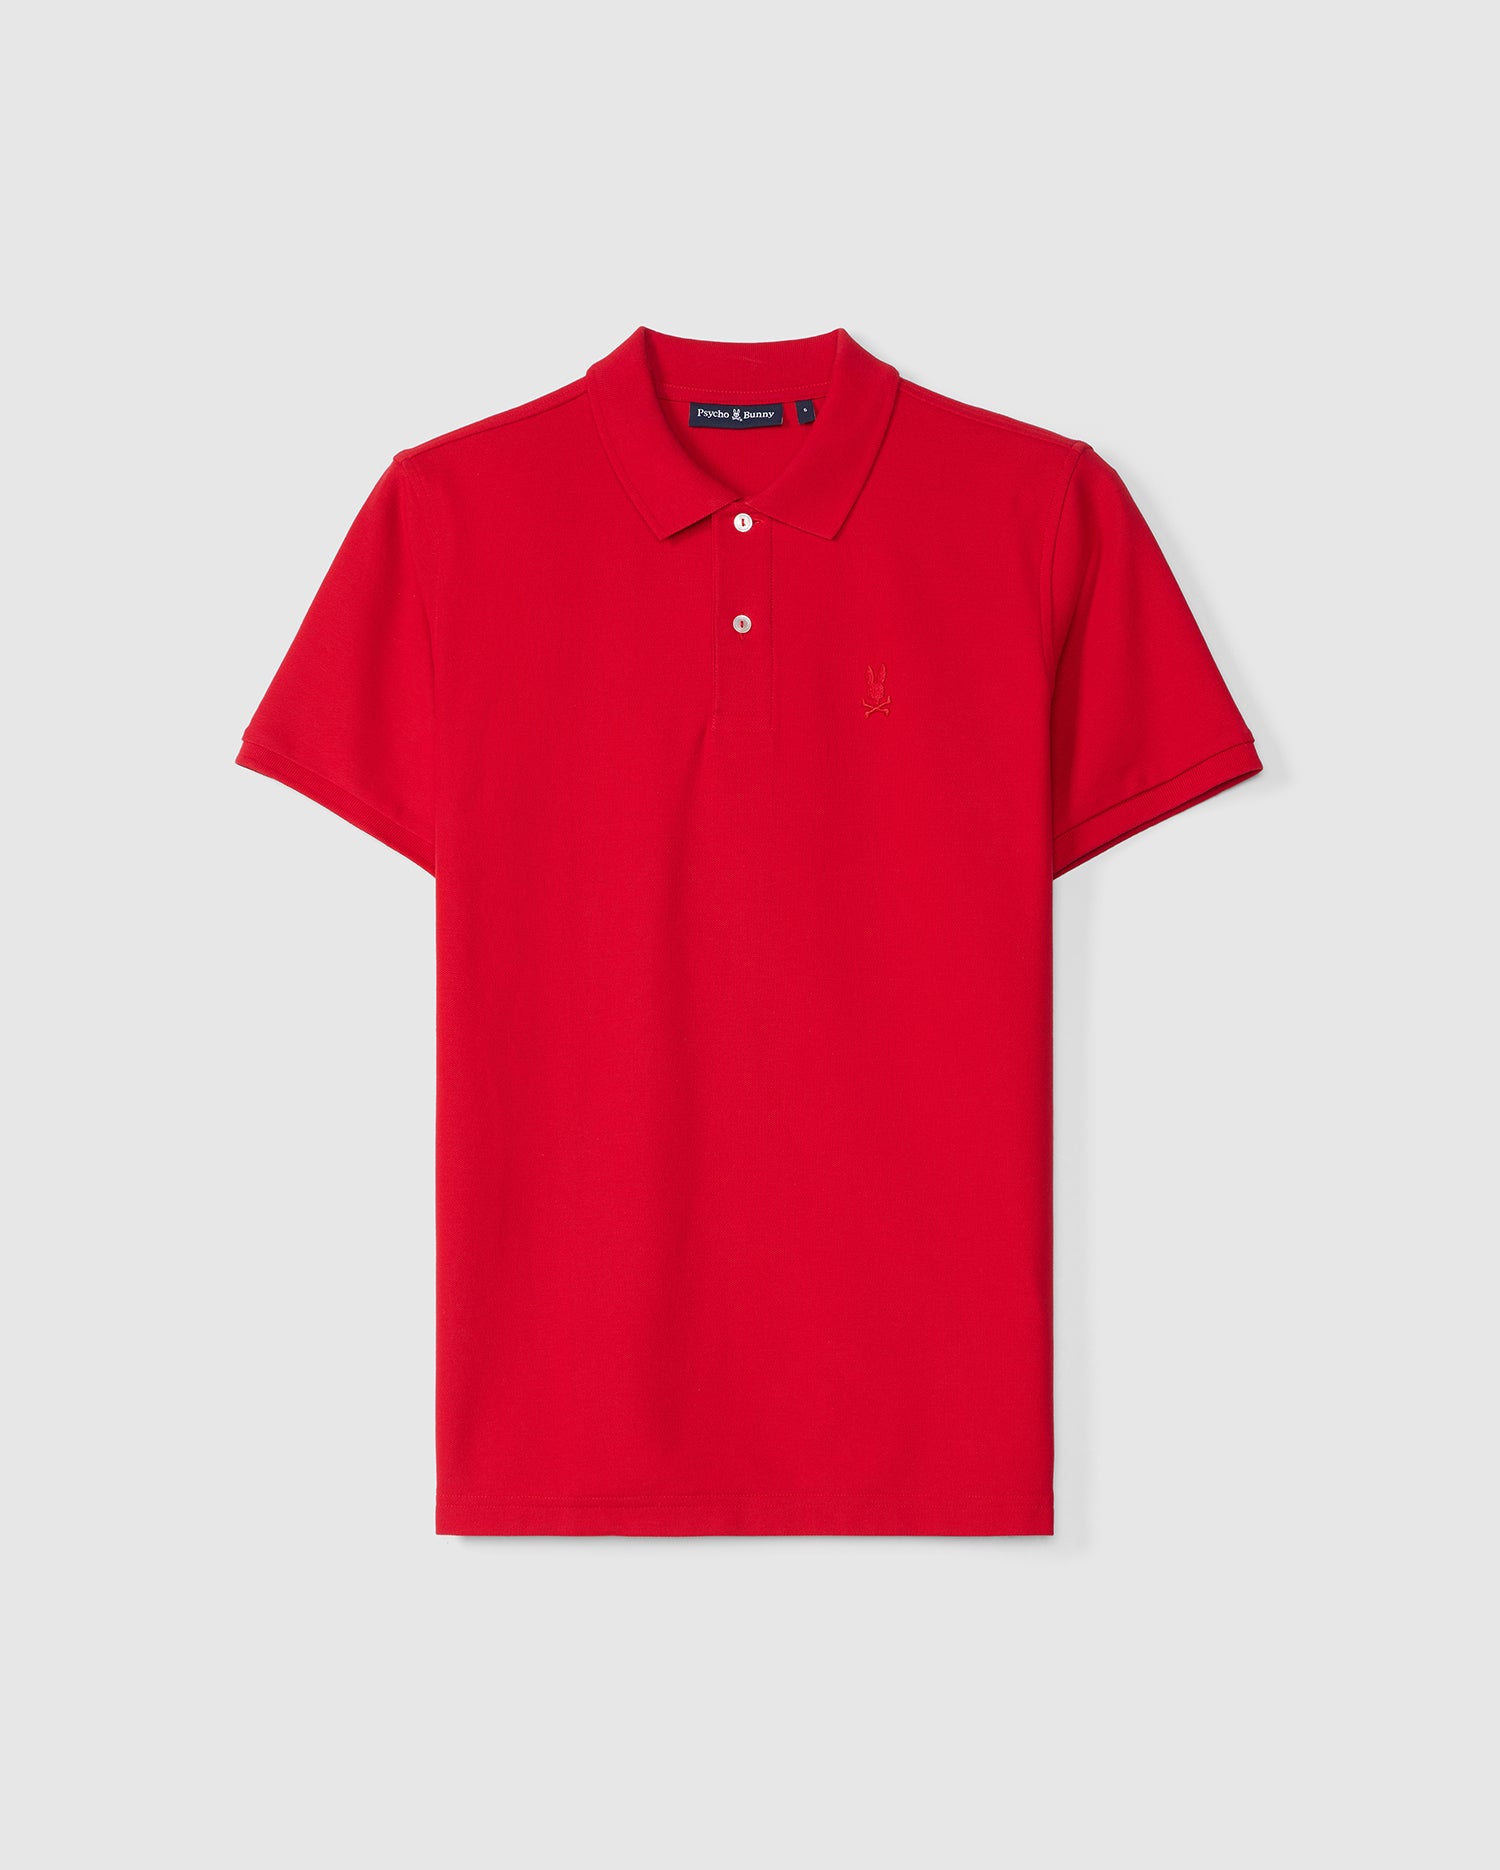 MENS RED EMBROIDERED CLASSIC PIQUE POLO PSYCHO BUNNY